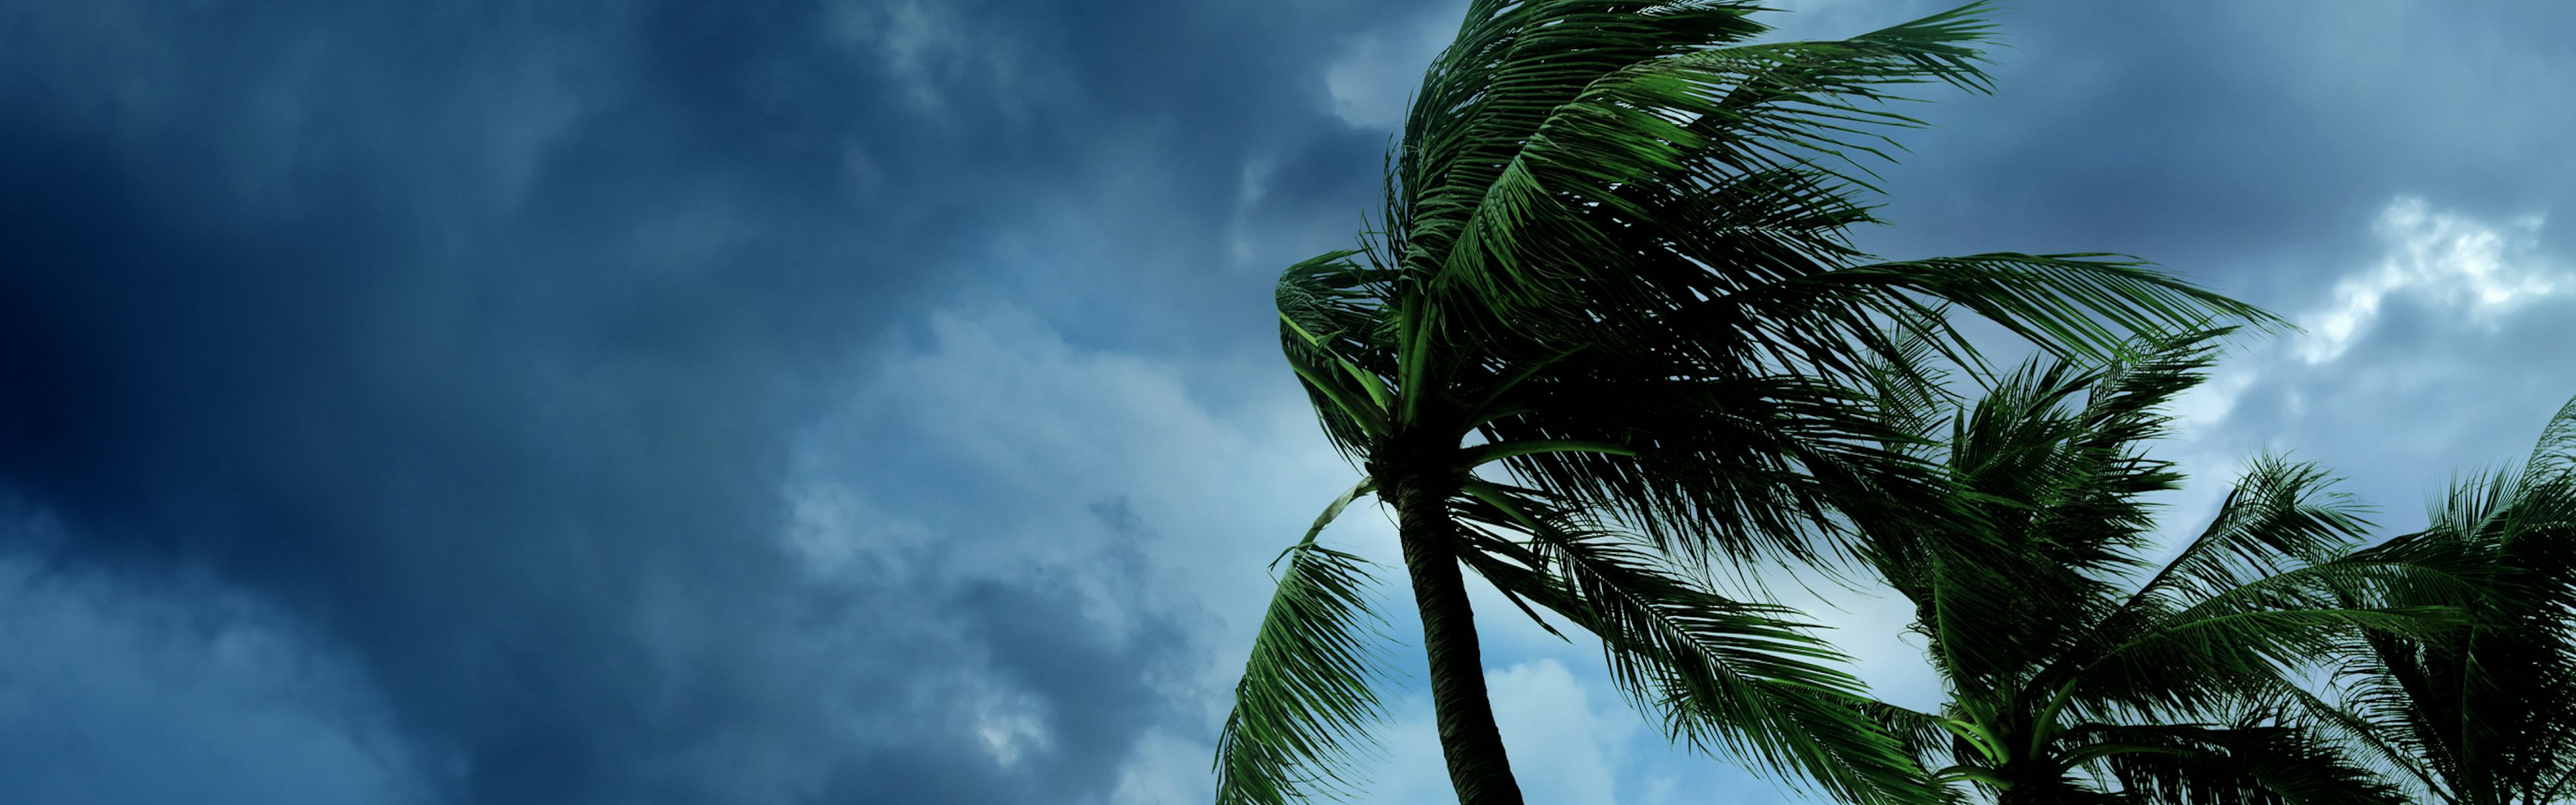 Palm trees with ominous clouds